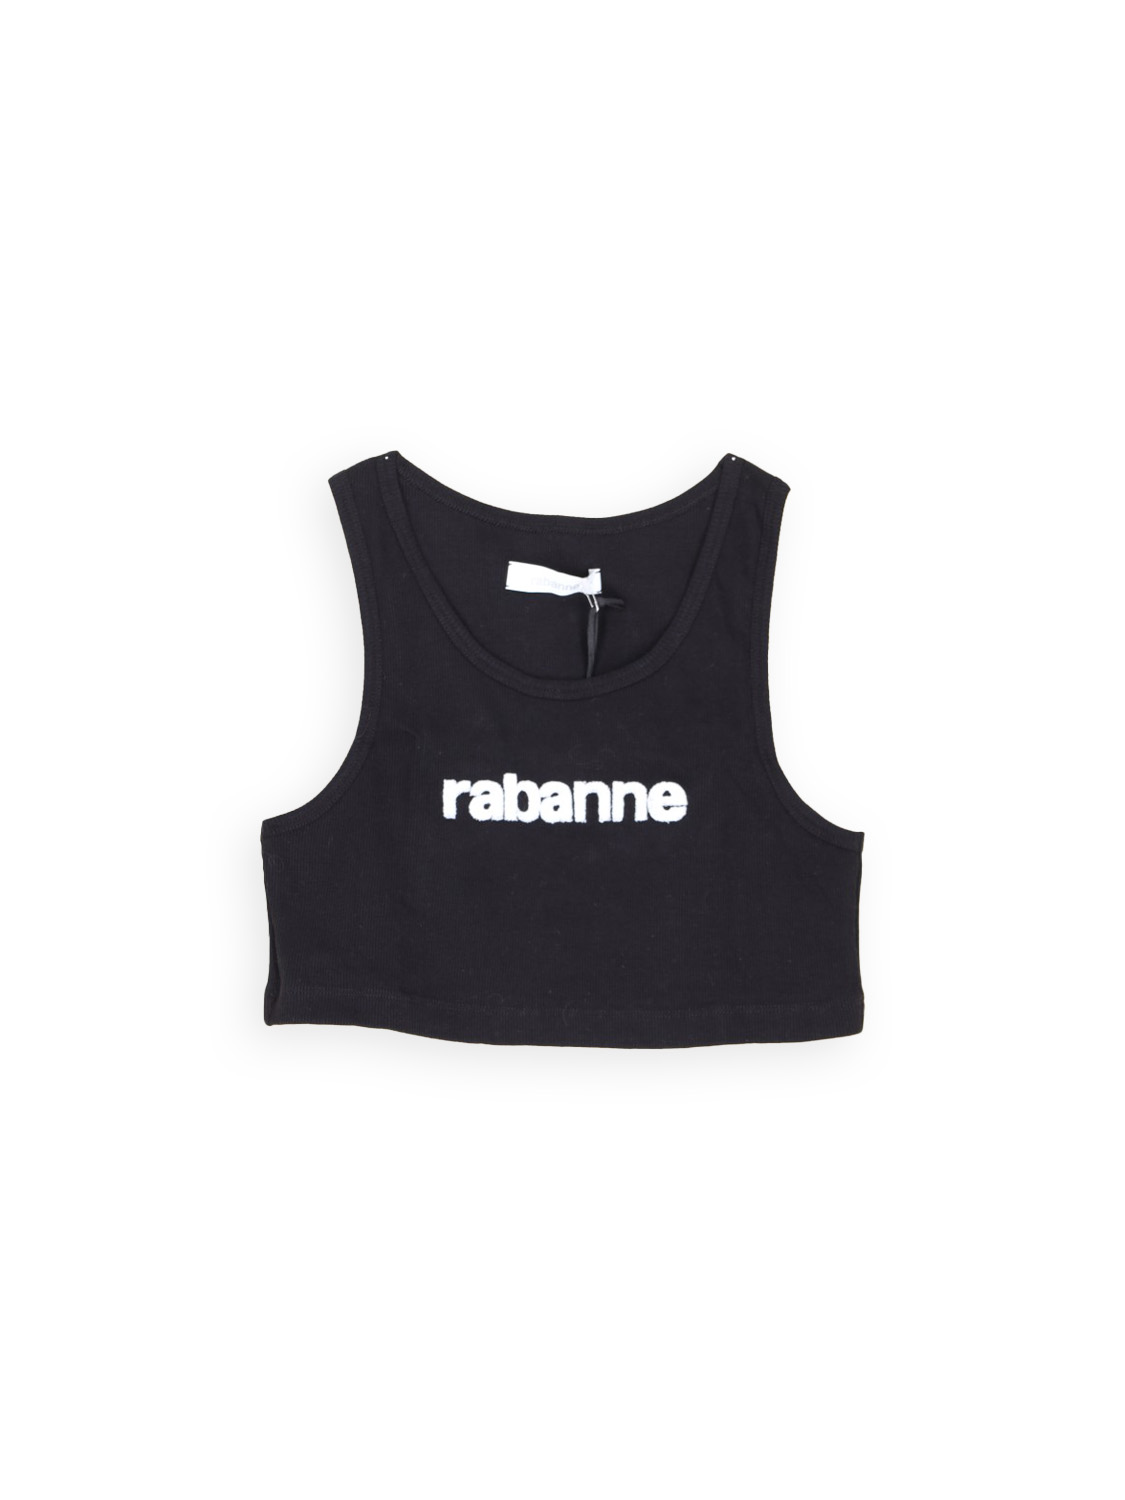 rabanne Cropped Tanktop with lableprint  white L